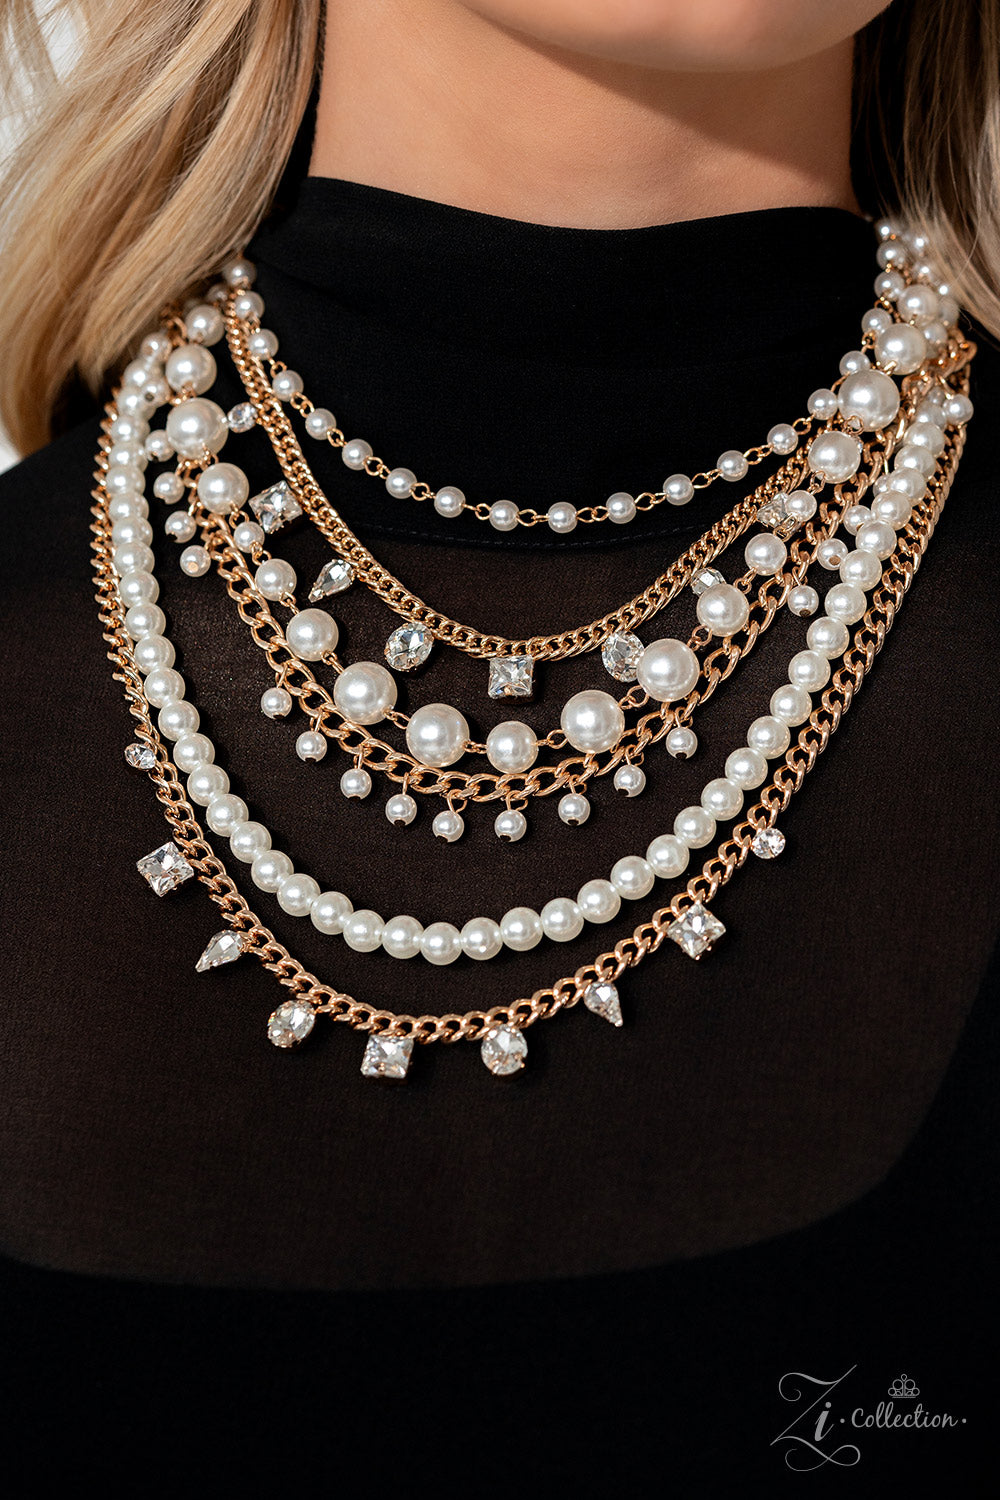 Paparazzi Accessories Aristocratic - Gold A mismatched collection of gold chains is layered with strands of pearly white beads to create luminous layers with charismatic chaos. Faceted white gems in an assortment of shapes are sporadically sprinkled along